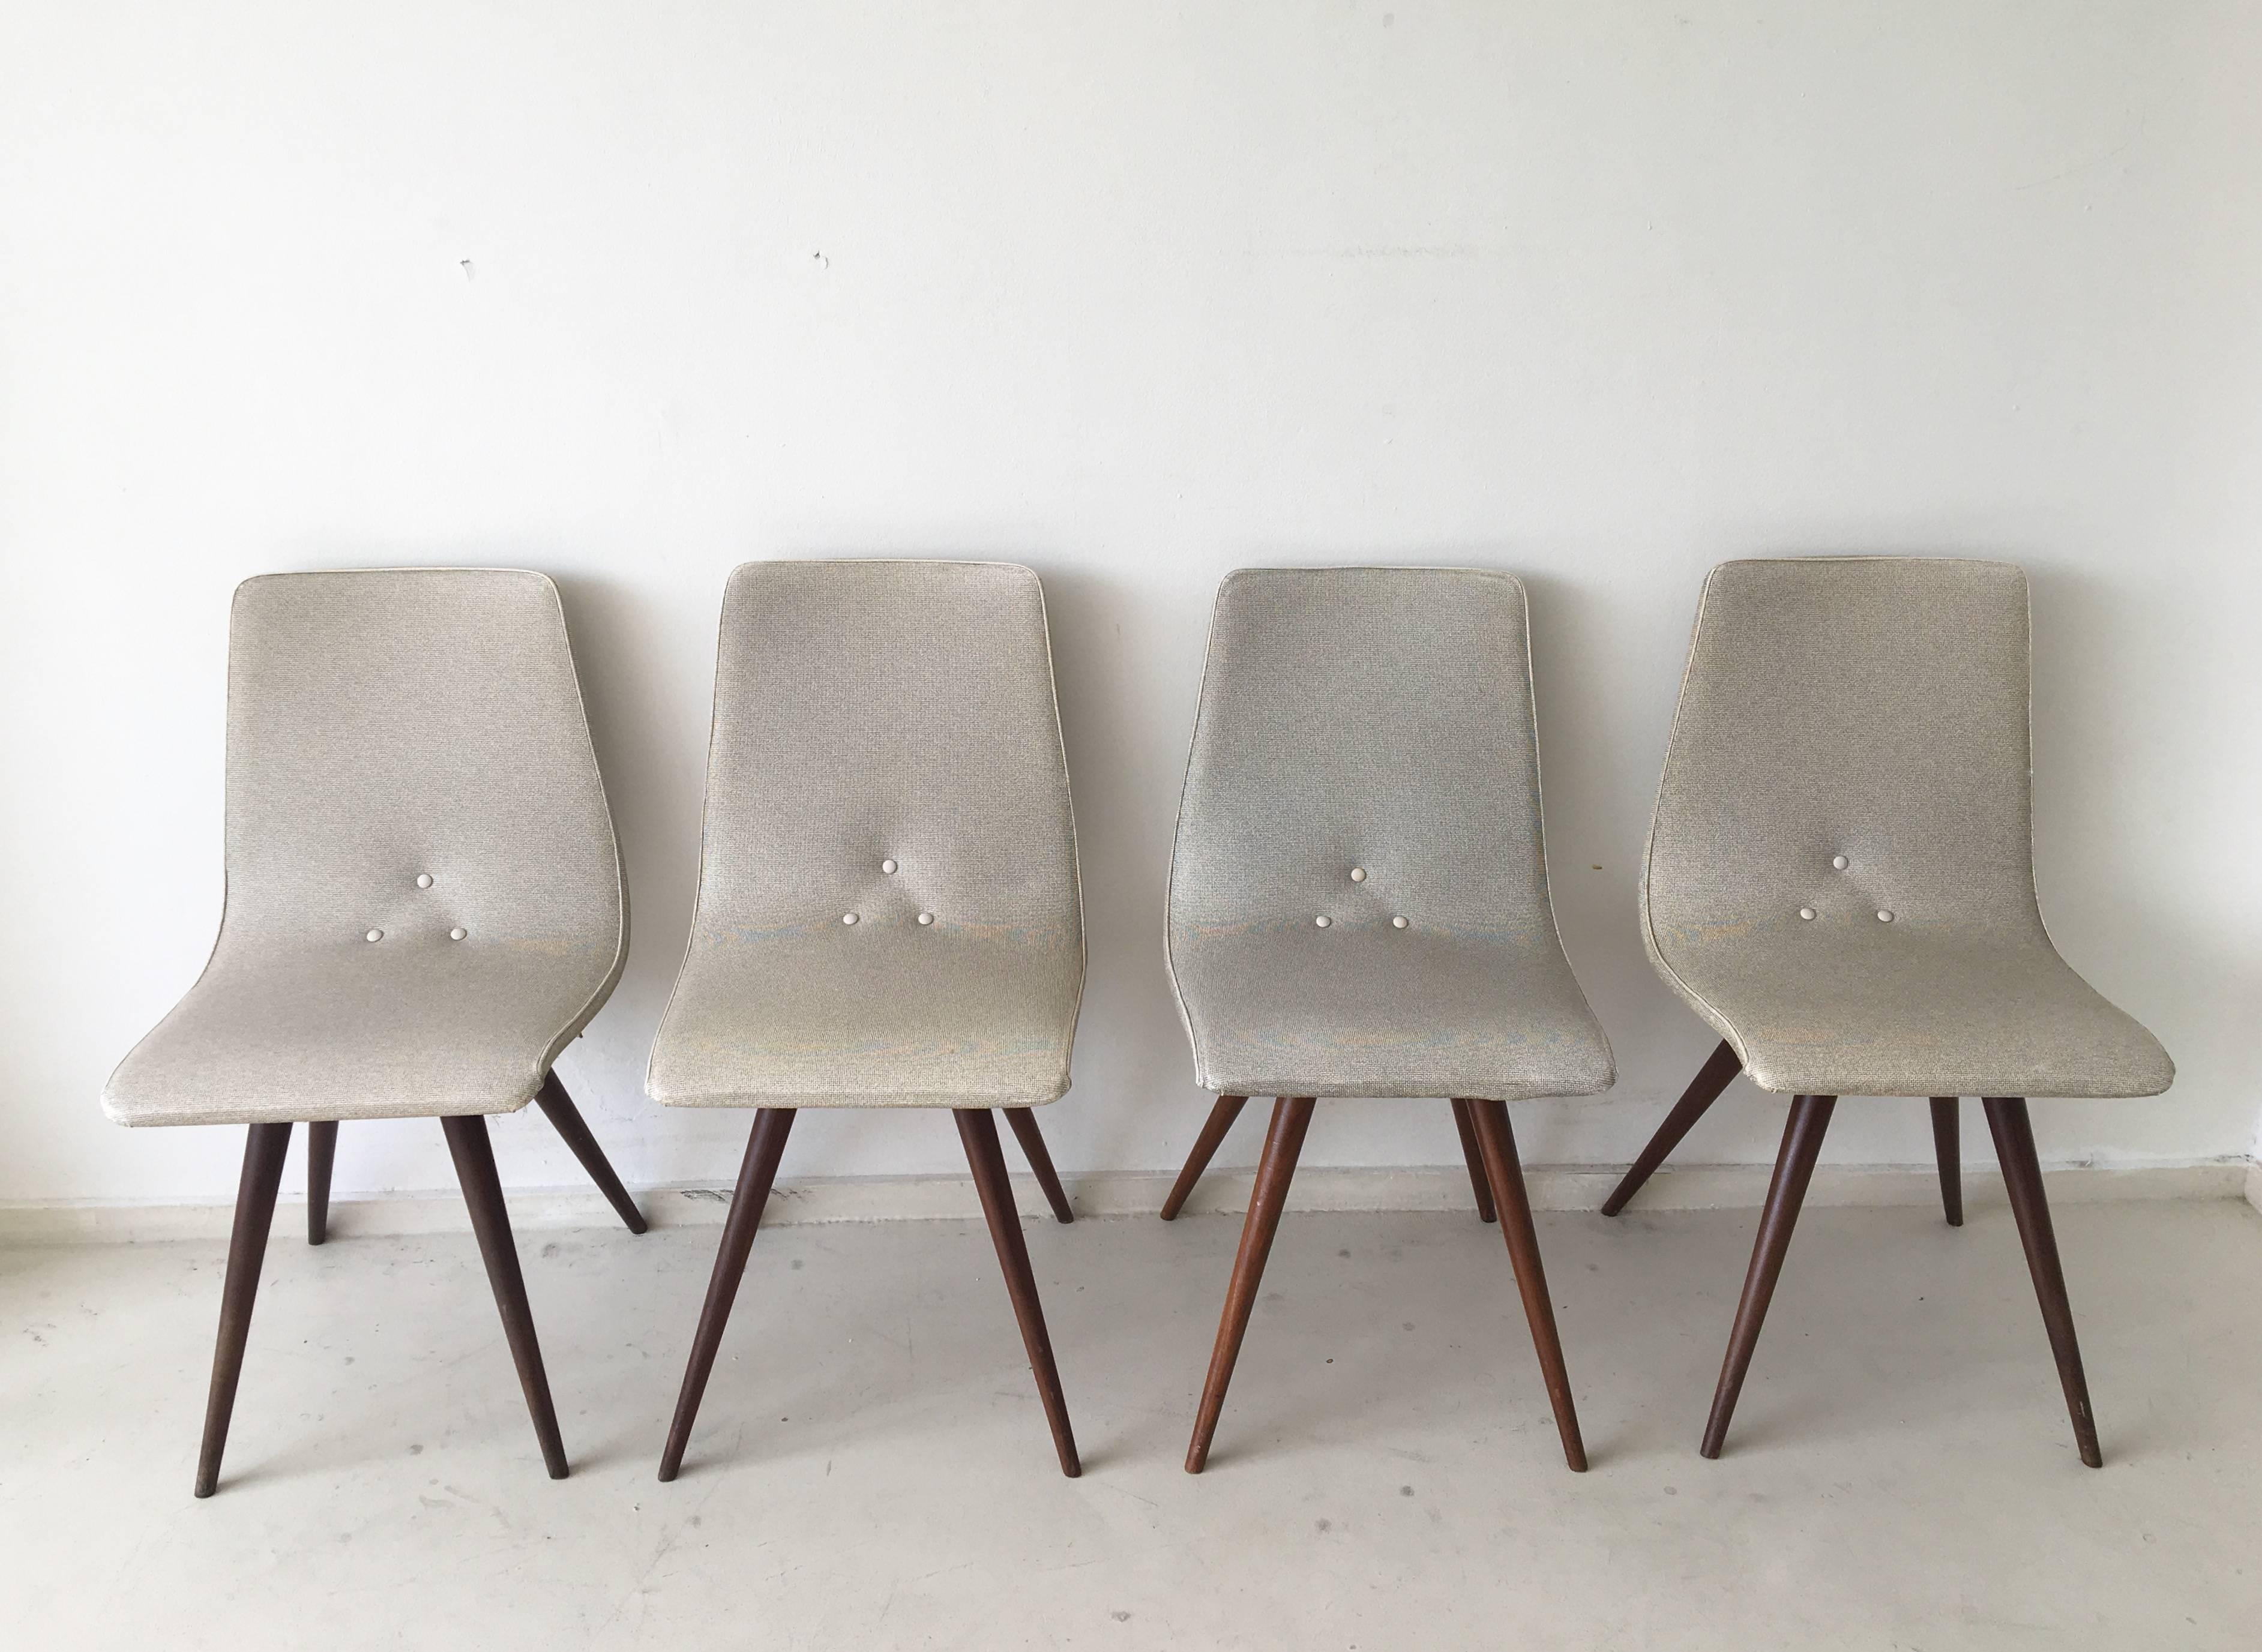 Dutch Rare White and Grey Mid-Century Dining Chairs, 1950s For Sale